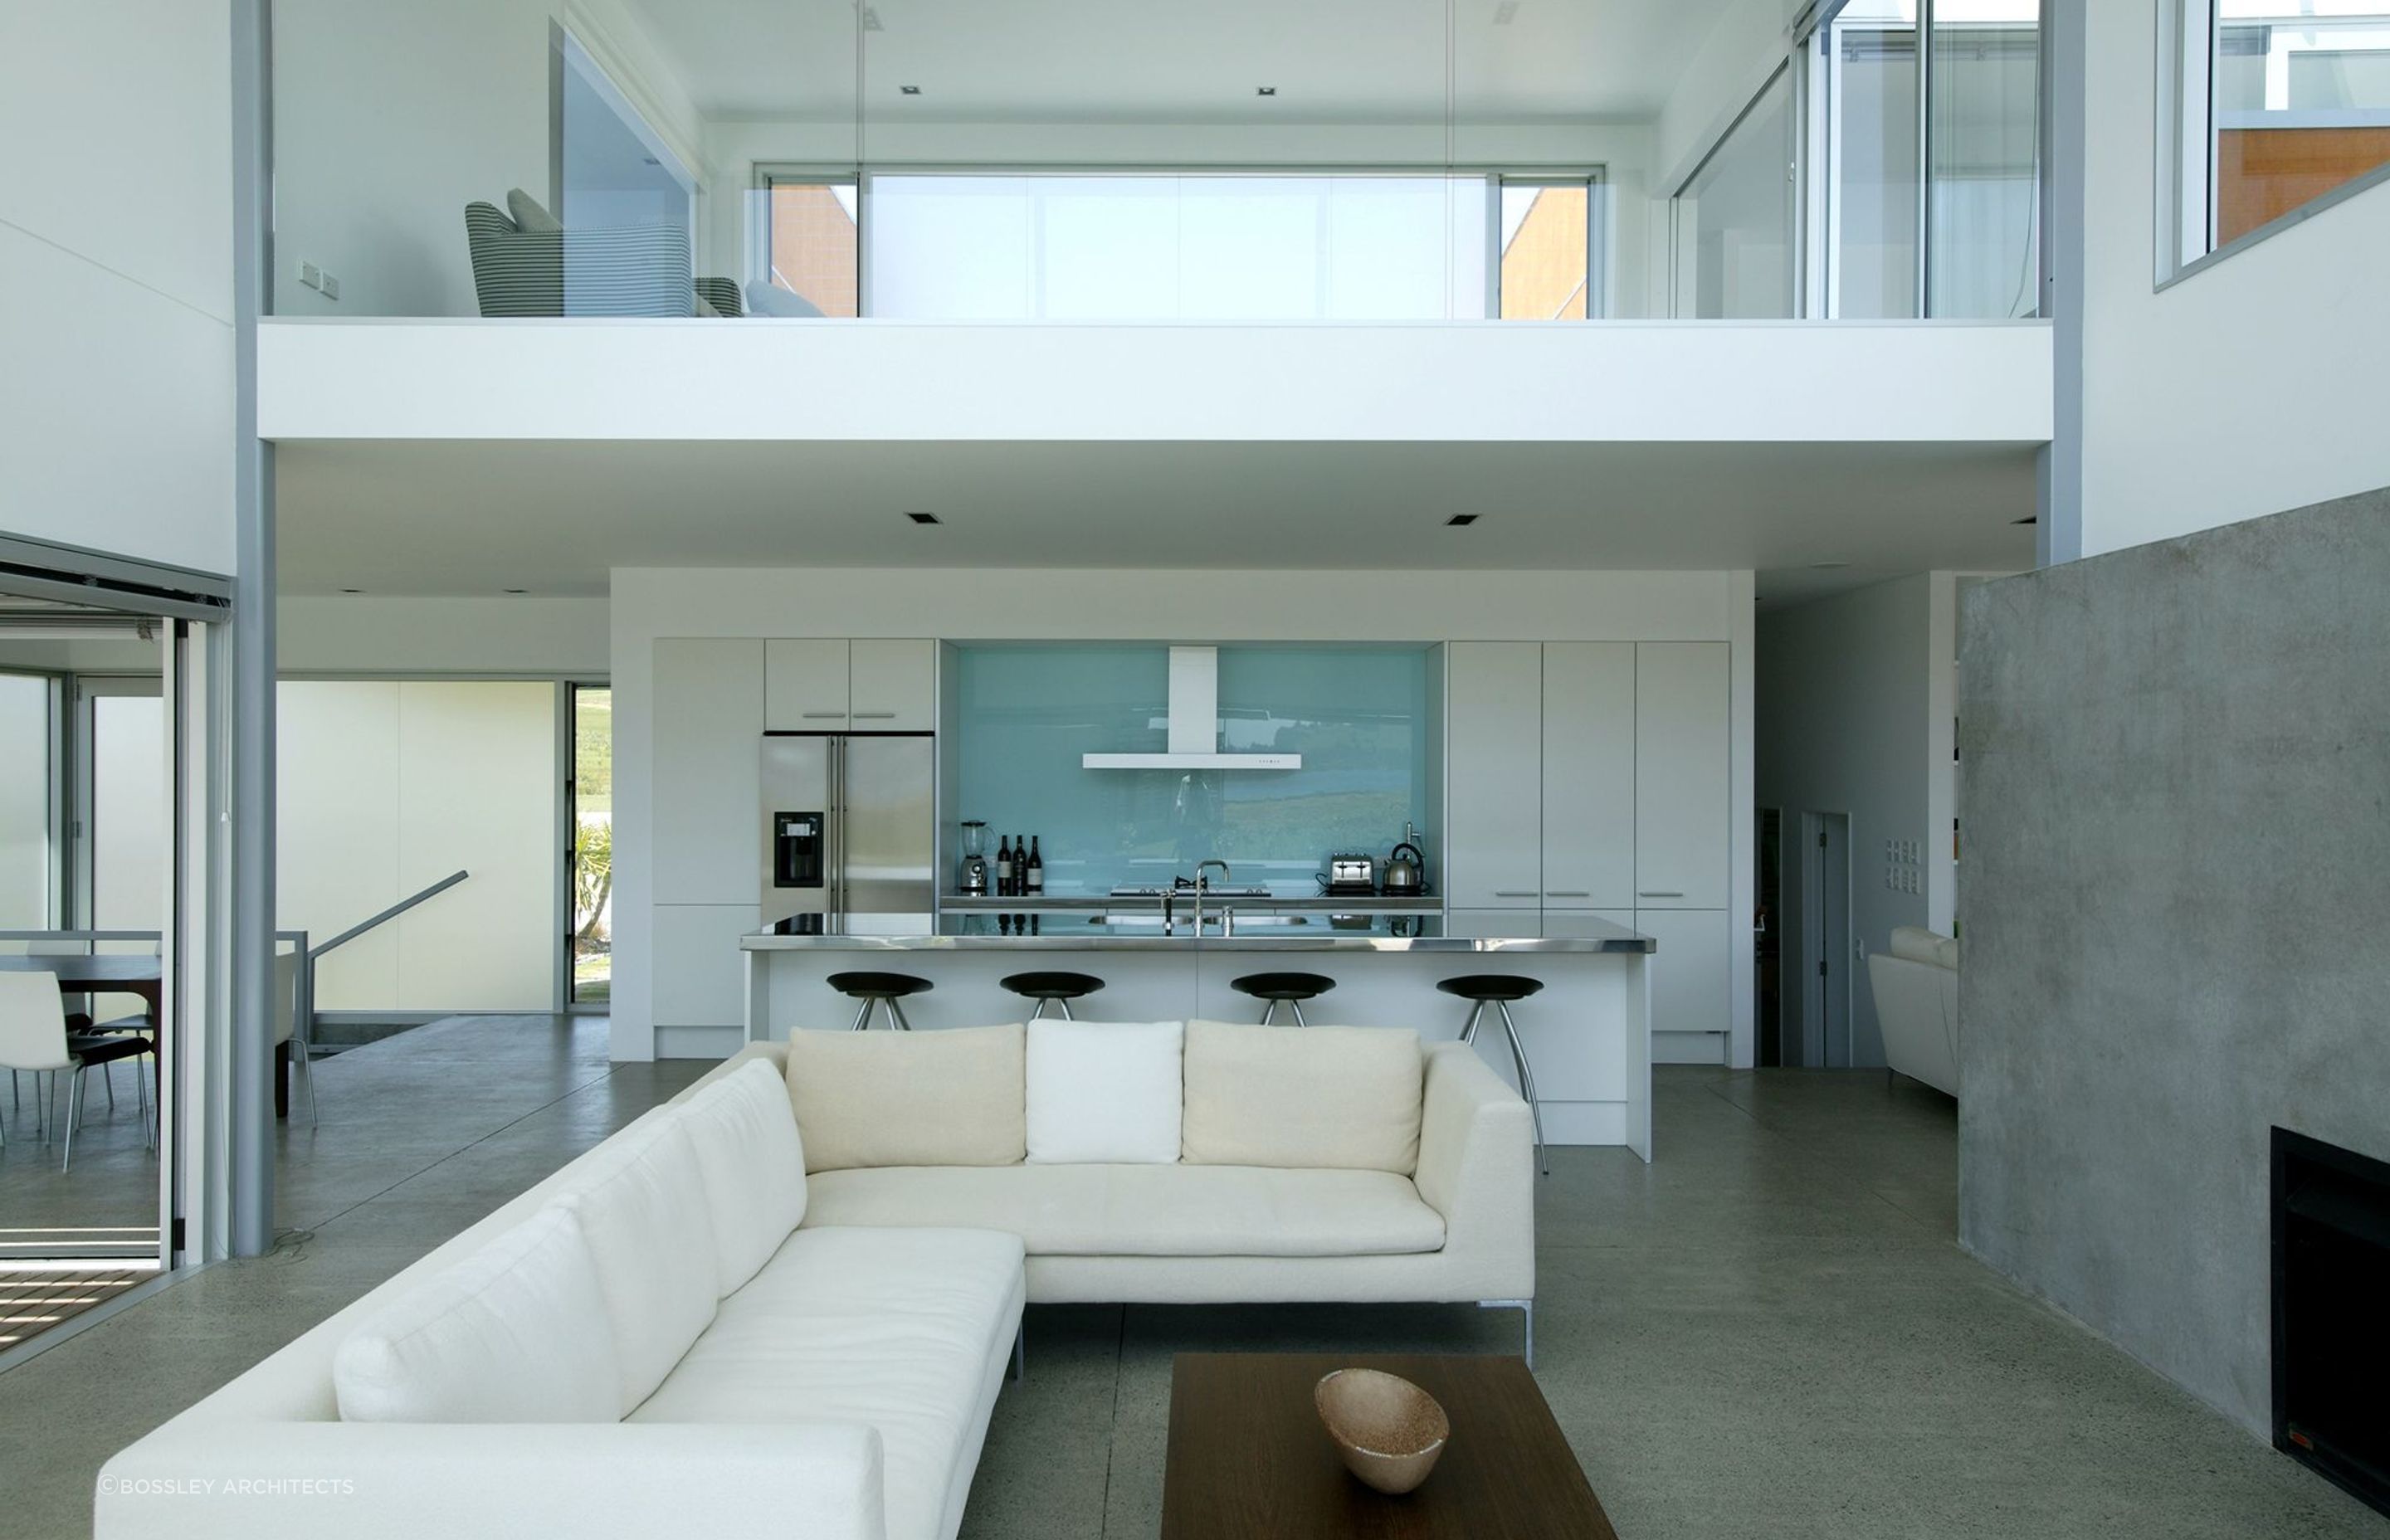 Modern, open plan living that can adapt with the always changing nature of coastal light.